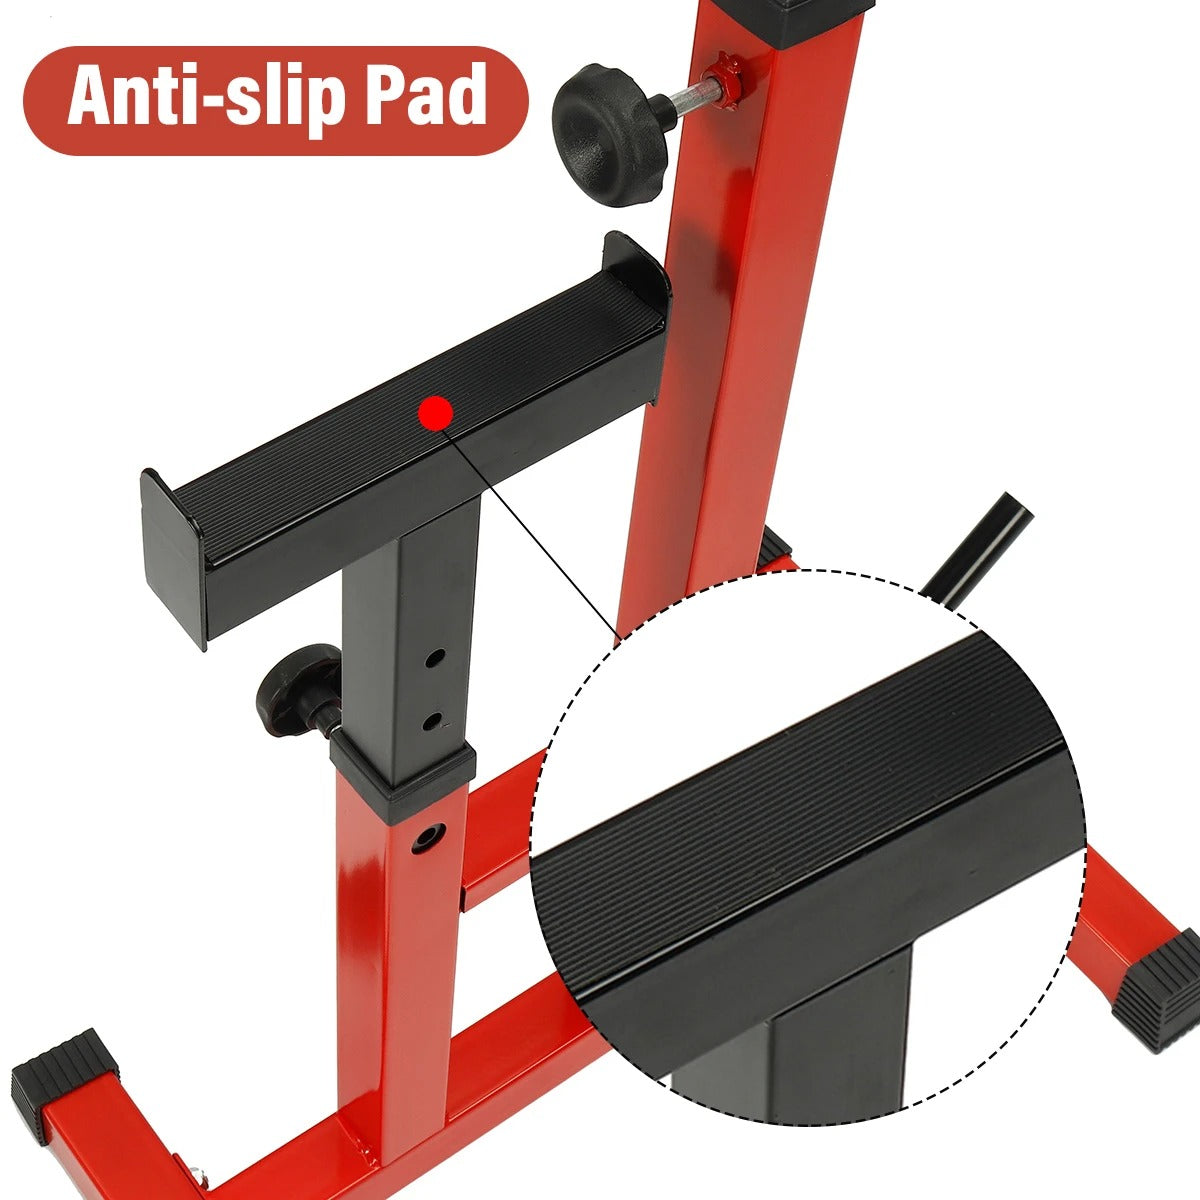 Multi-Adjustable Squat rack Lifting Barbell Stand Fitness Rack - The Shopsite